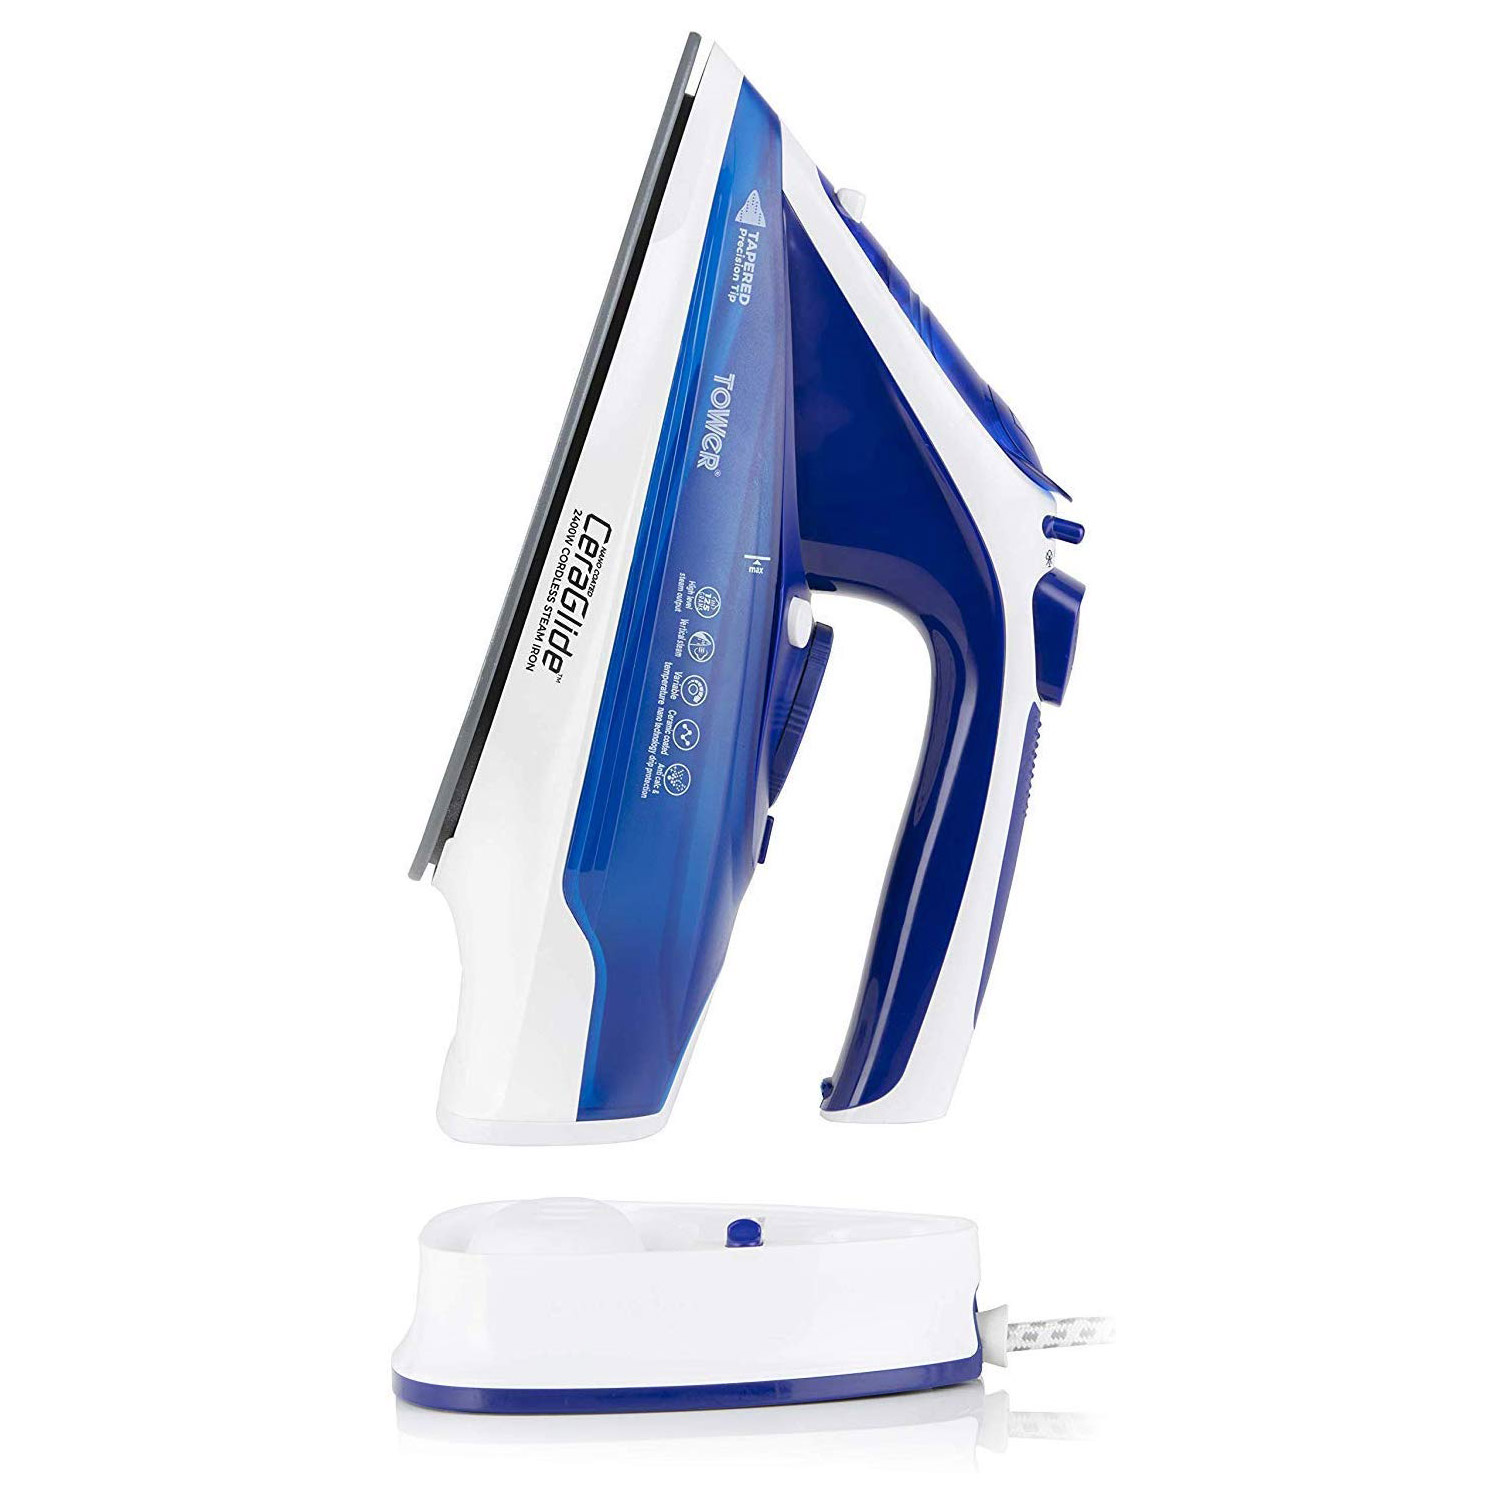 Image of Tower T22008BLU 2 in 1 Cord Cordless Steam Iron in White and Blue